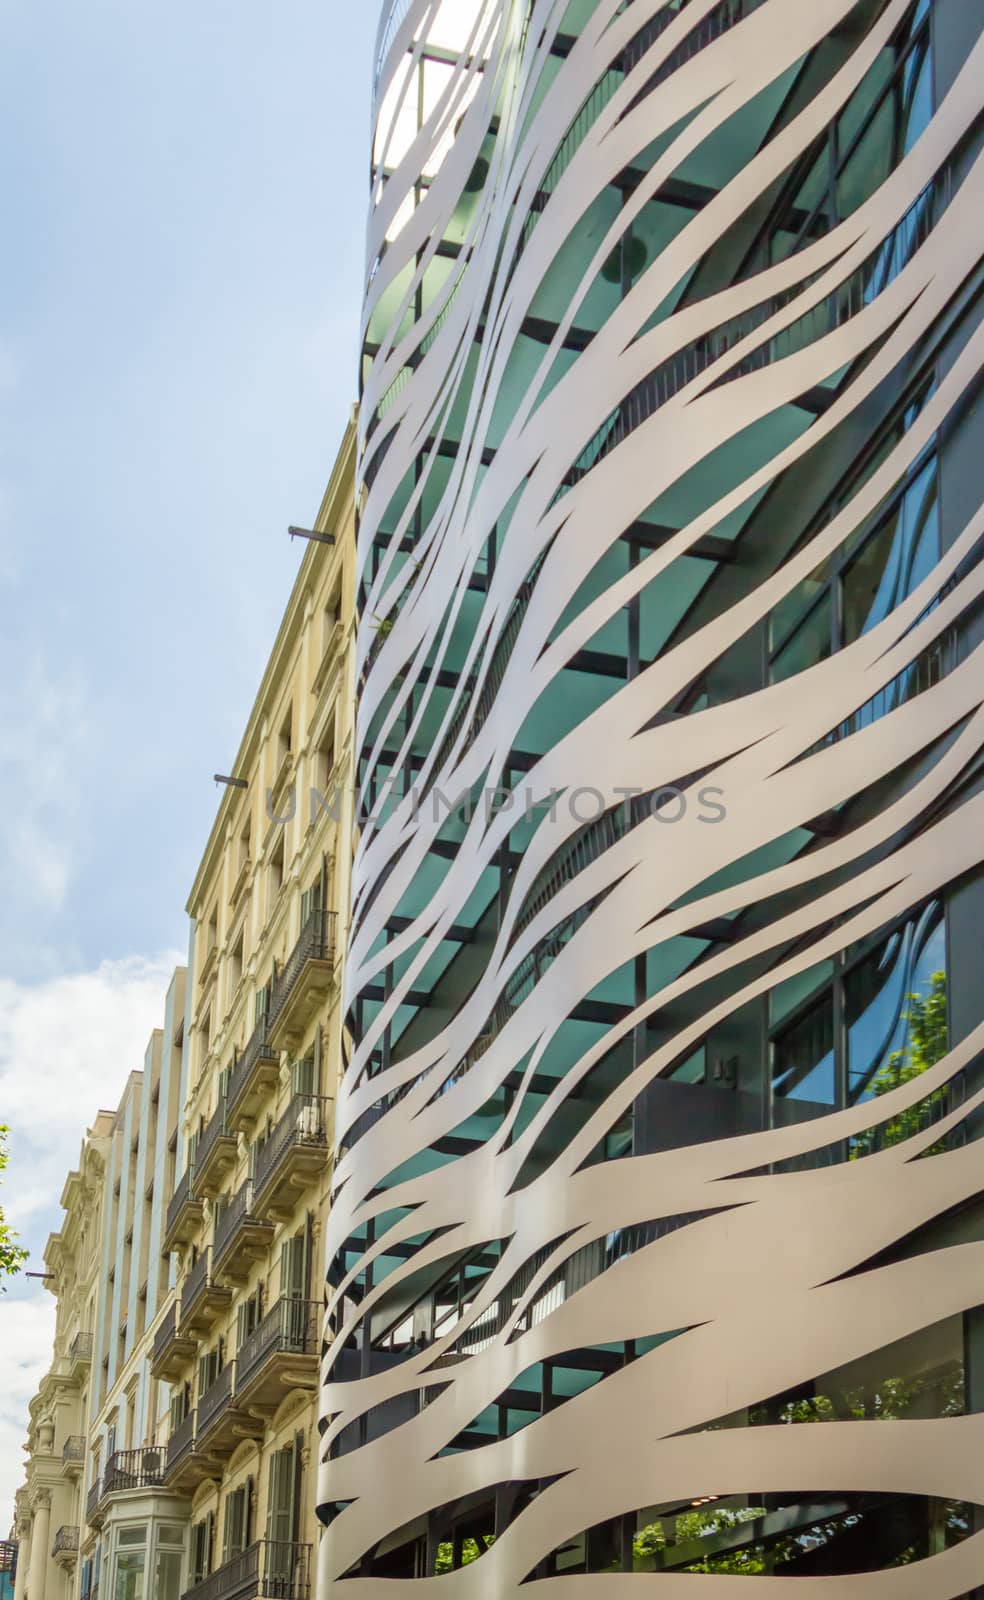 Facade of modern building, constructed with metal elements and waves forms